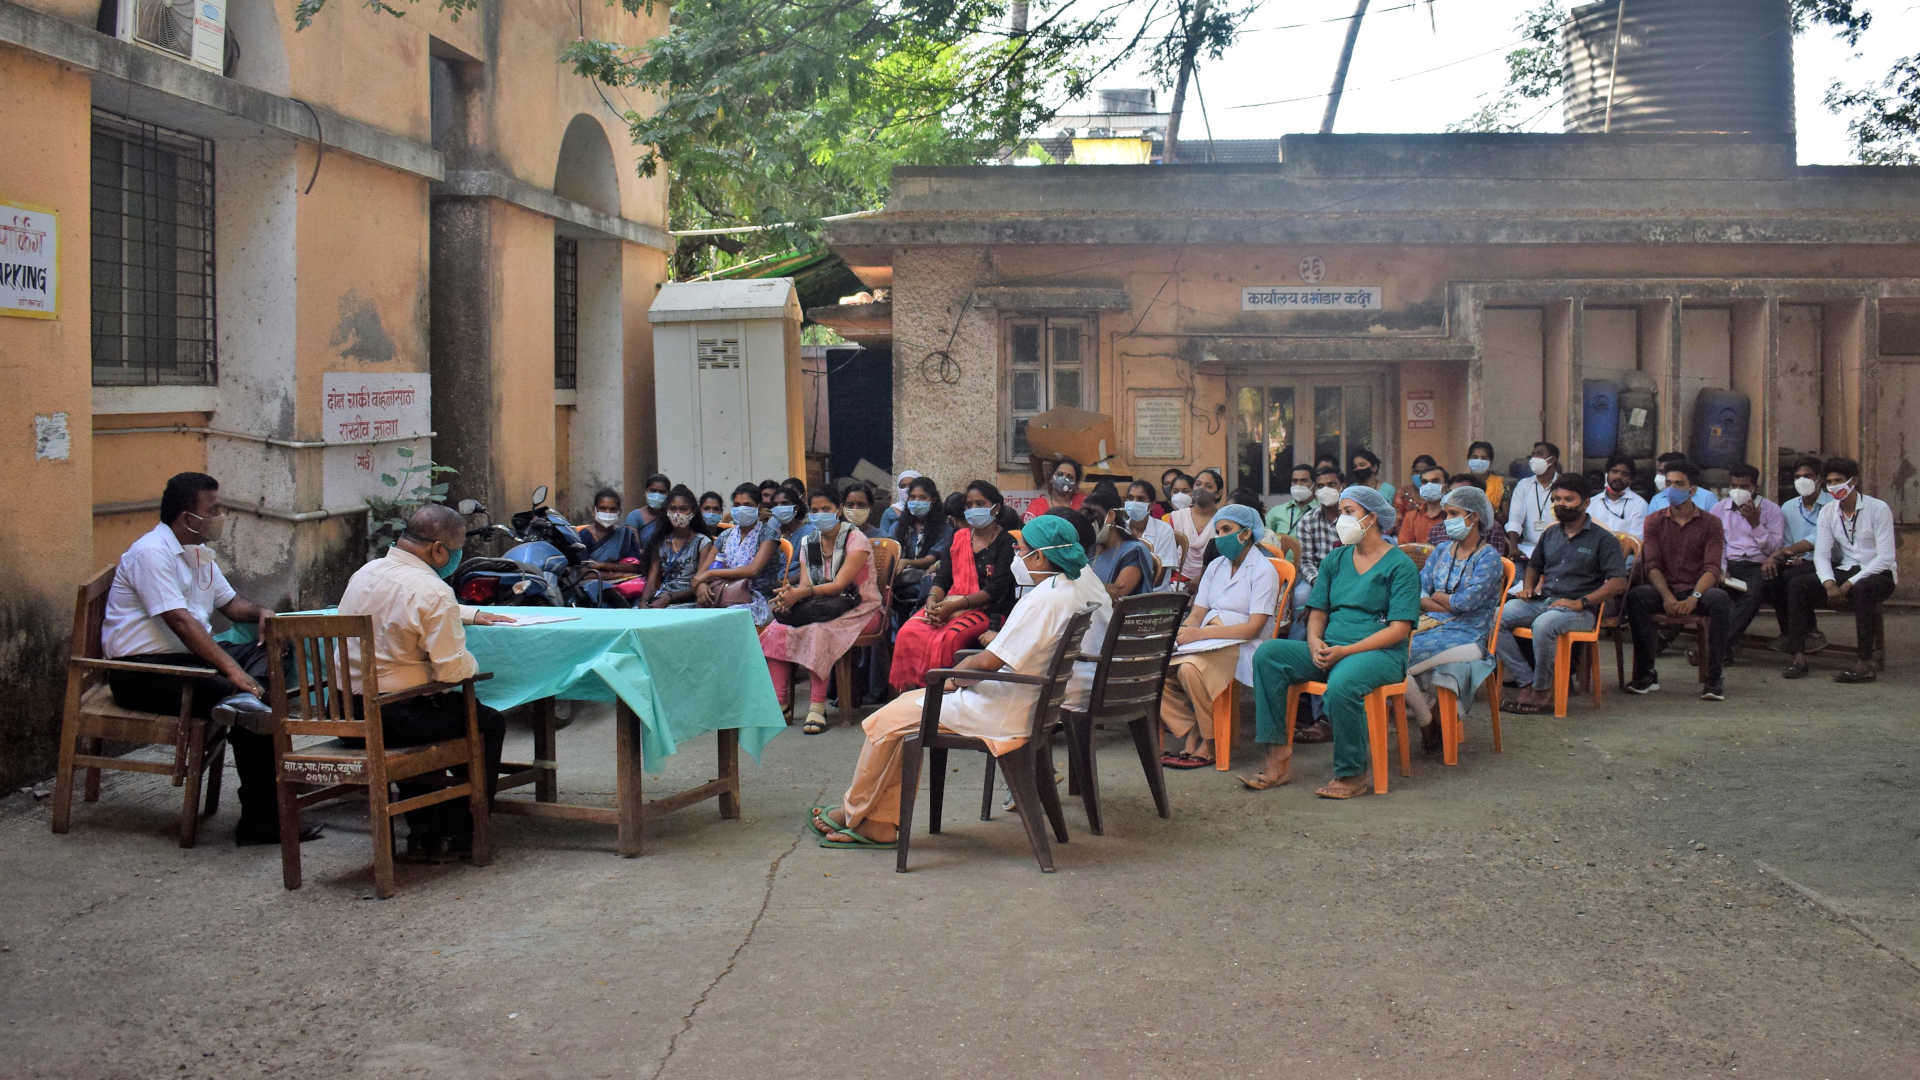 Medical staff are briefed at the Government Rural Hospital in Palghar, India.